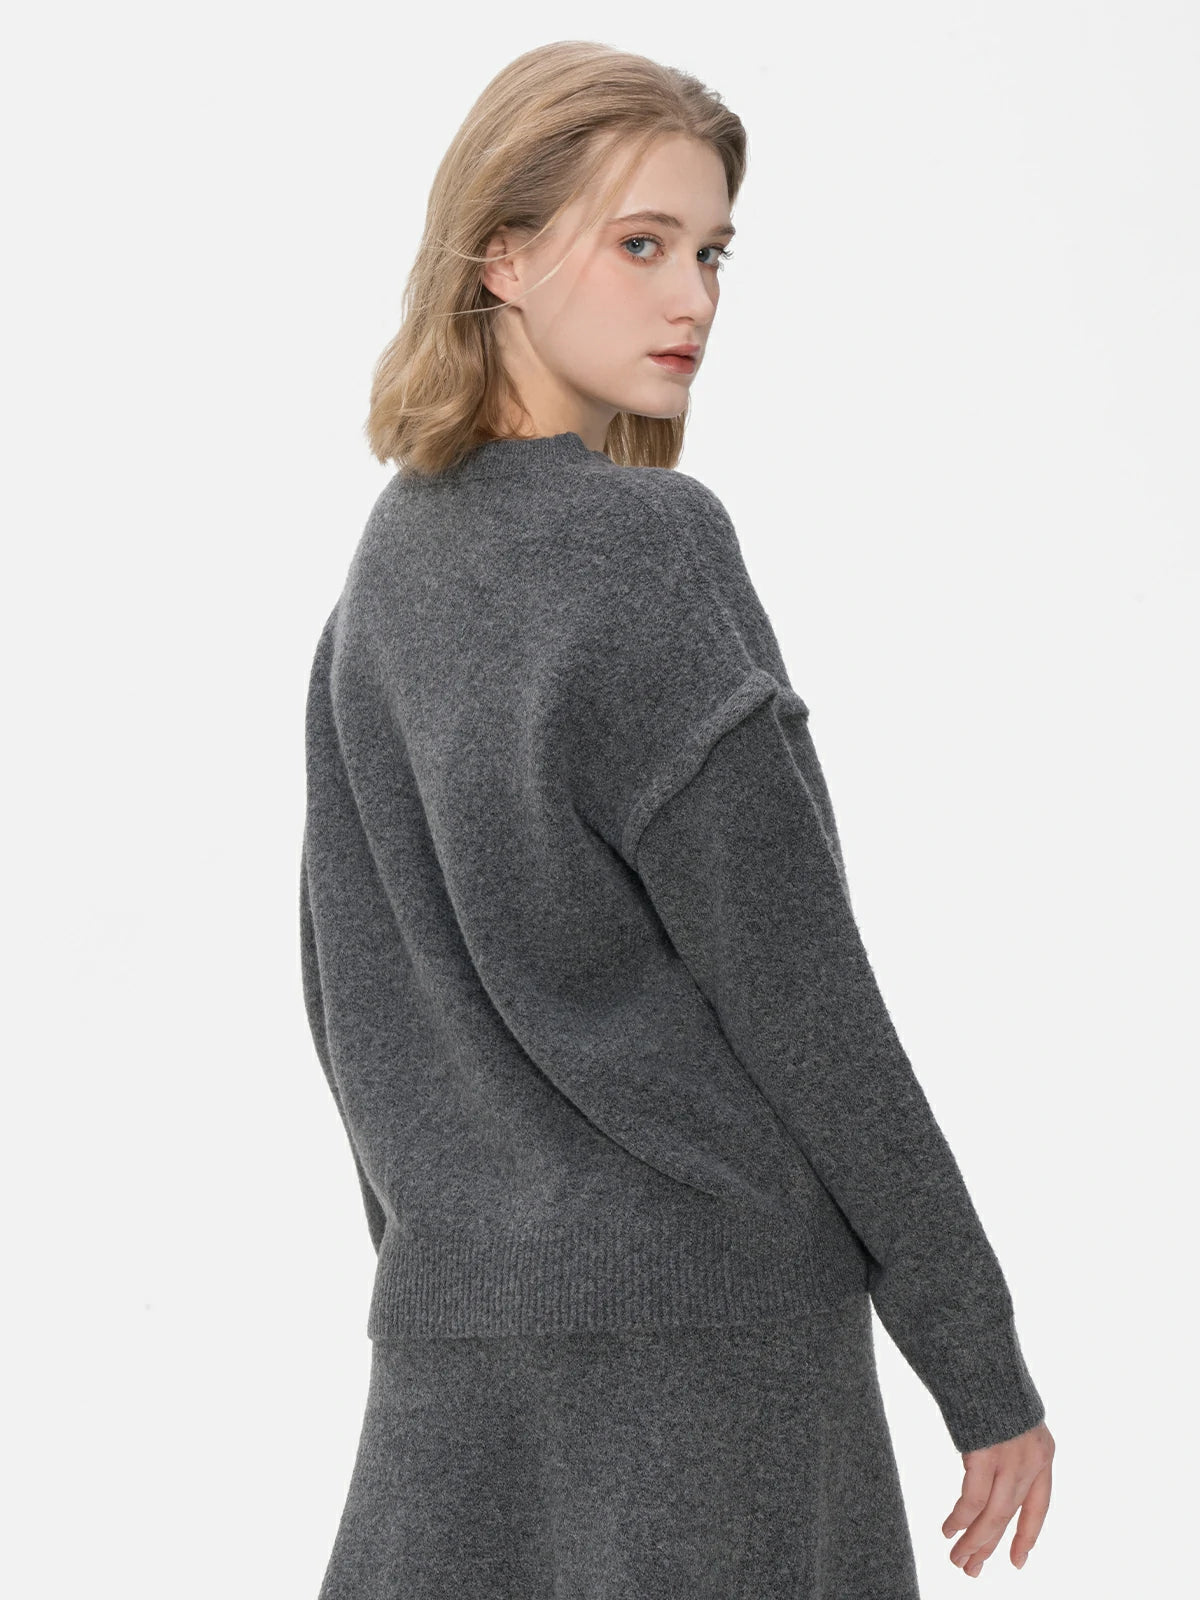 Elevate your casual elegance with this gray sweater, featuring a classic round-neck design, comfortable fit, and understated style.